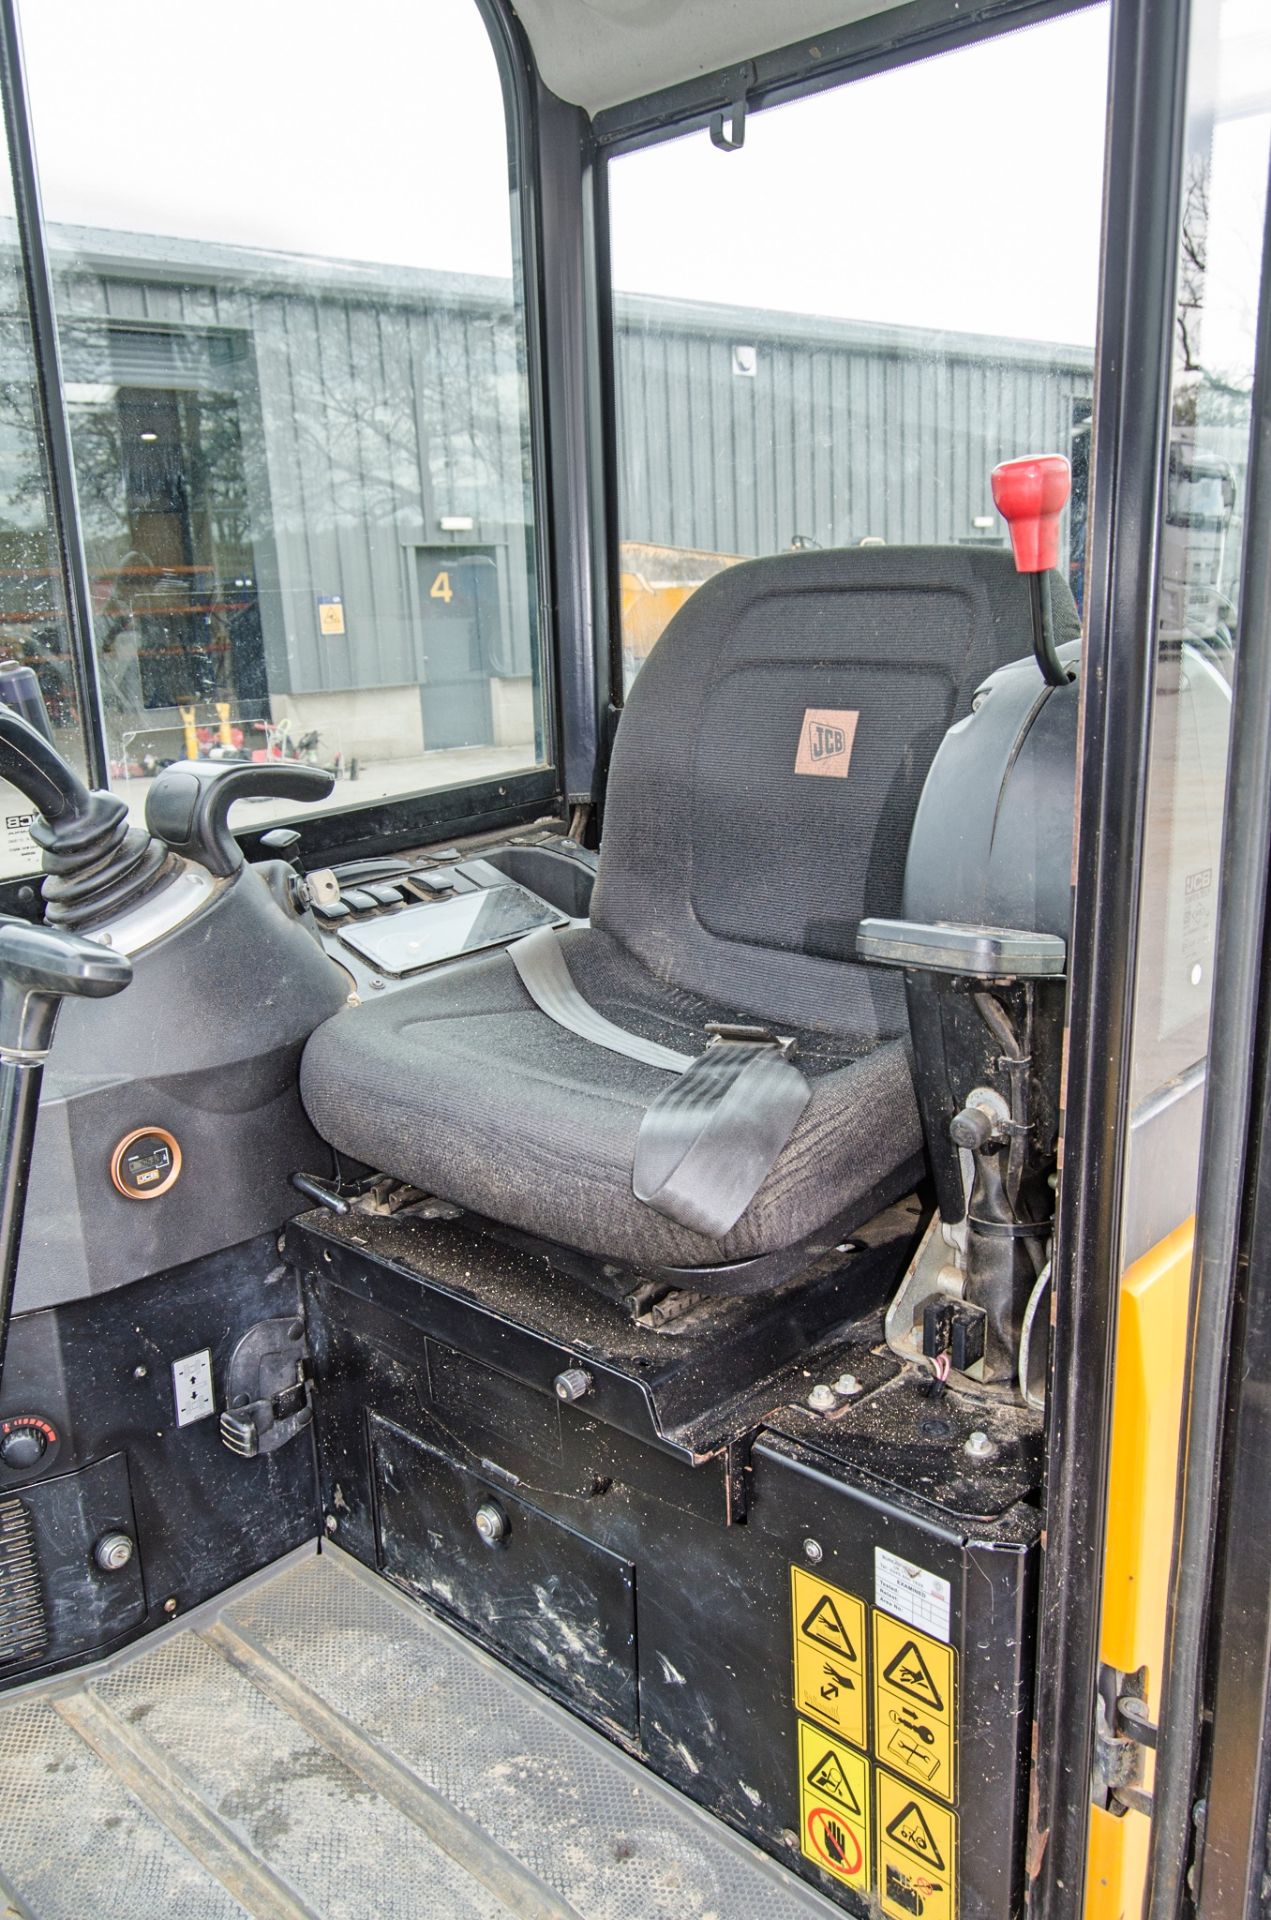 JCB 19 C-1 1.9 tonne rubber tracked mini excavator Year: 2017 S/N: 2494021 Recorded Hours: 1063 - Image 19 of 26